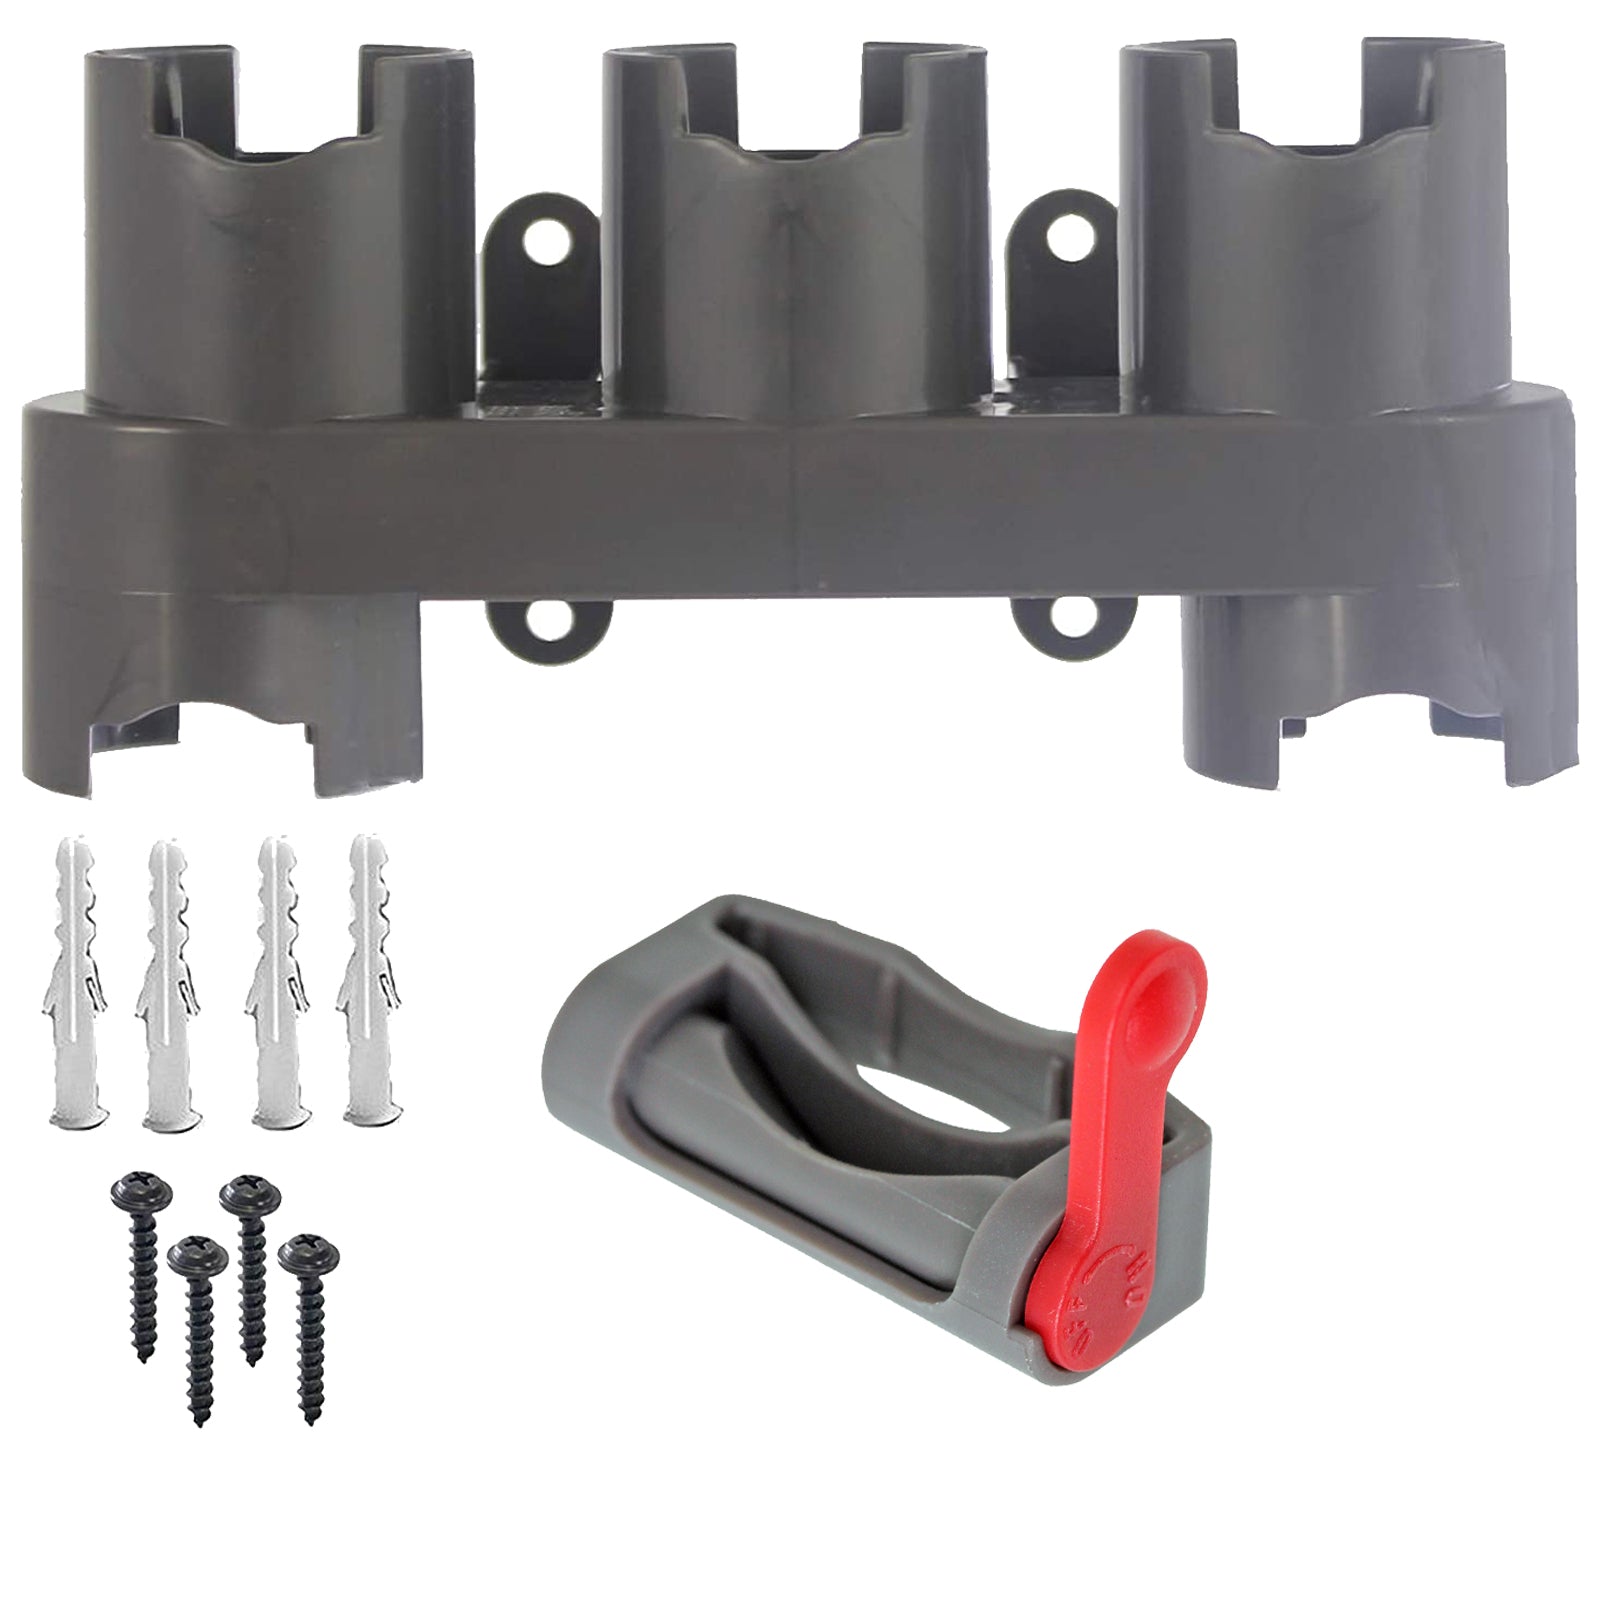 Wall Mounted Accessory Tool Holder Rack + Trigger Lock for DYSON V10 SV12 Vacuum Cleaner